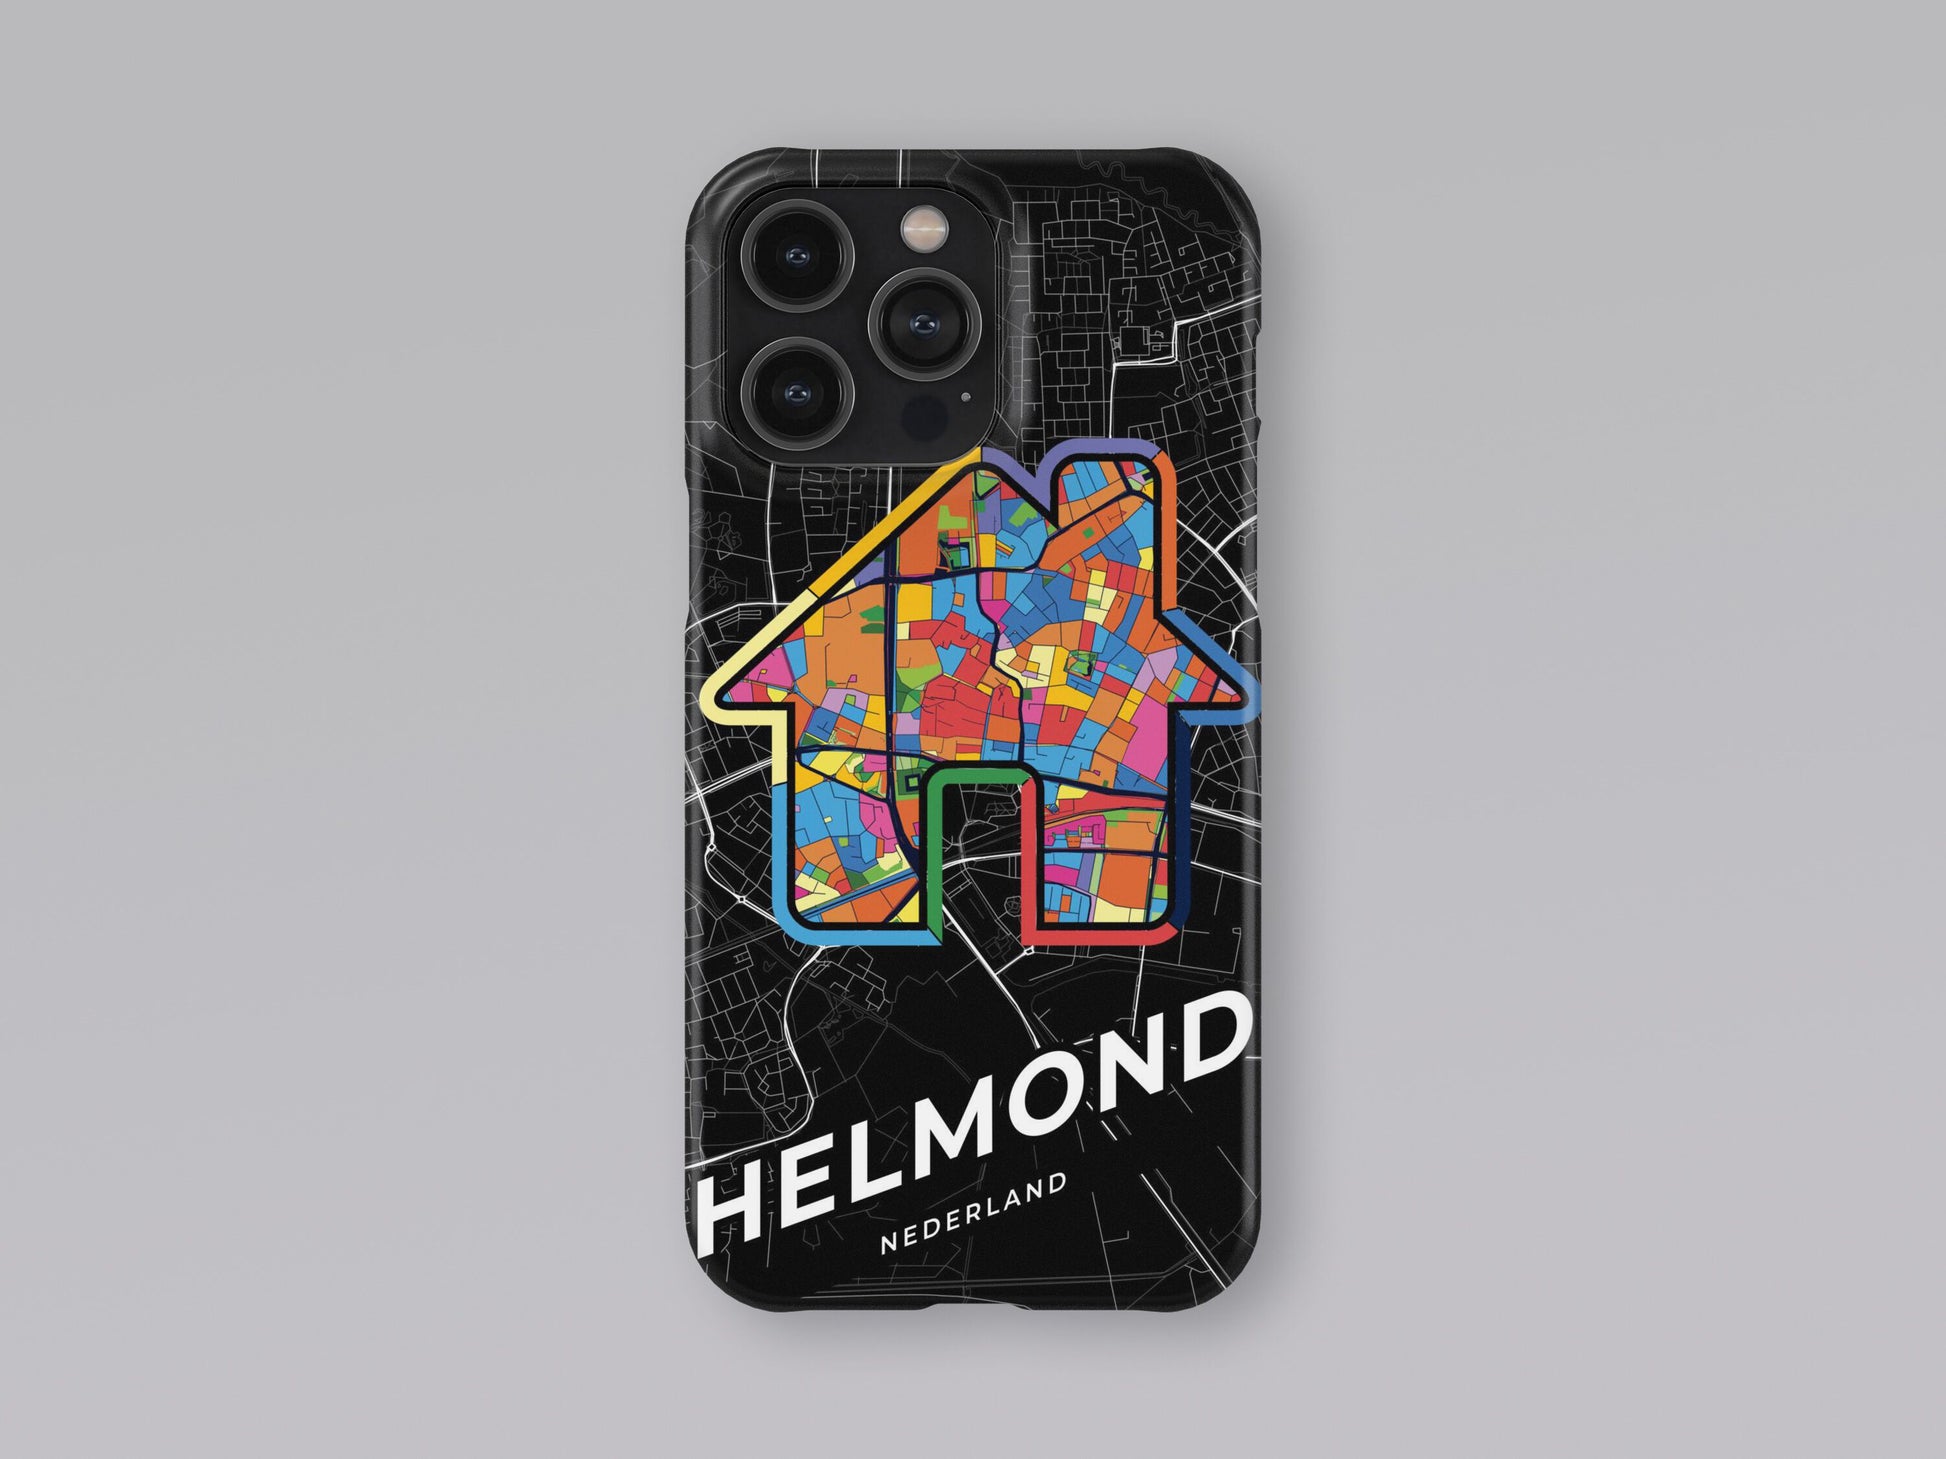 Helmond Netherlands slim phone case with colorful icon. Birthday, wedding or housewarming gift. Couple match cases. 3